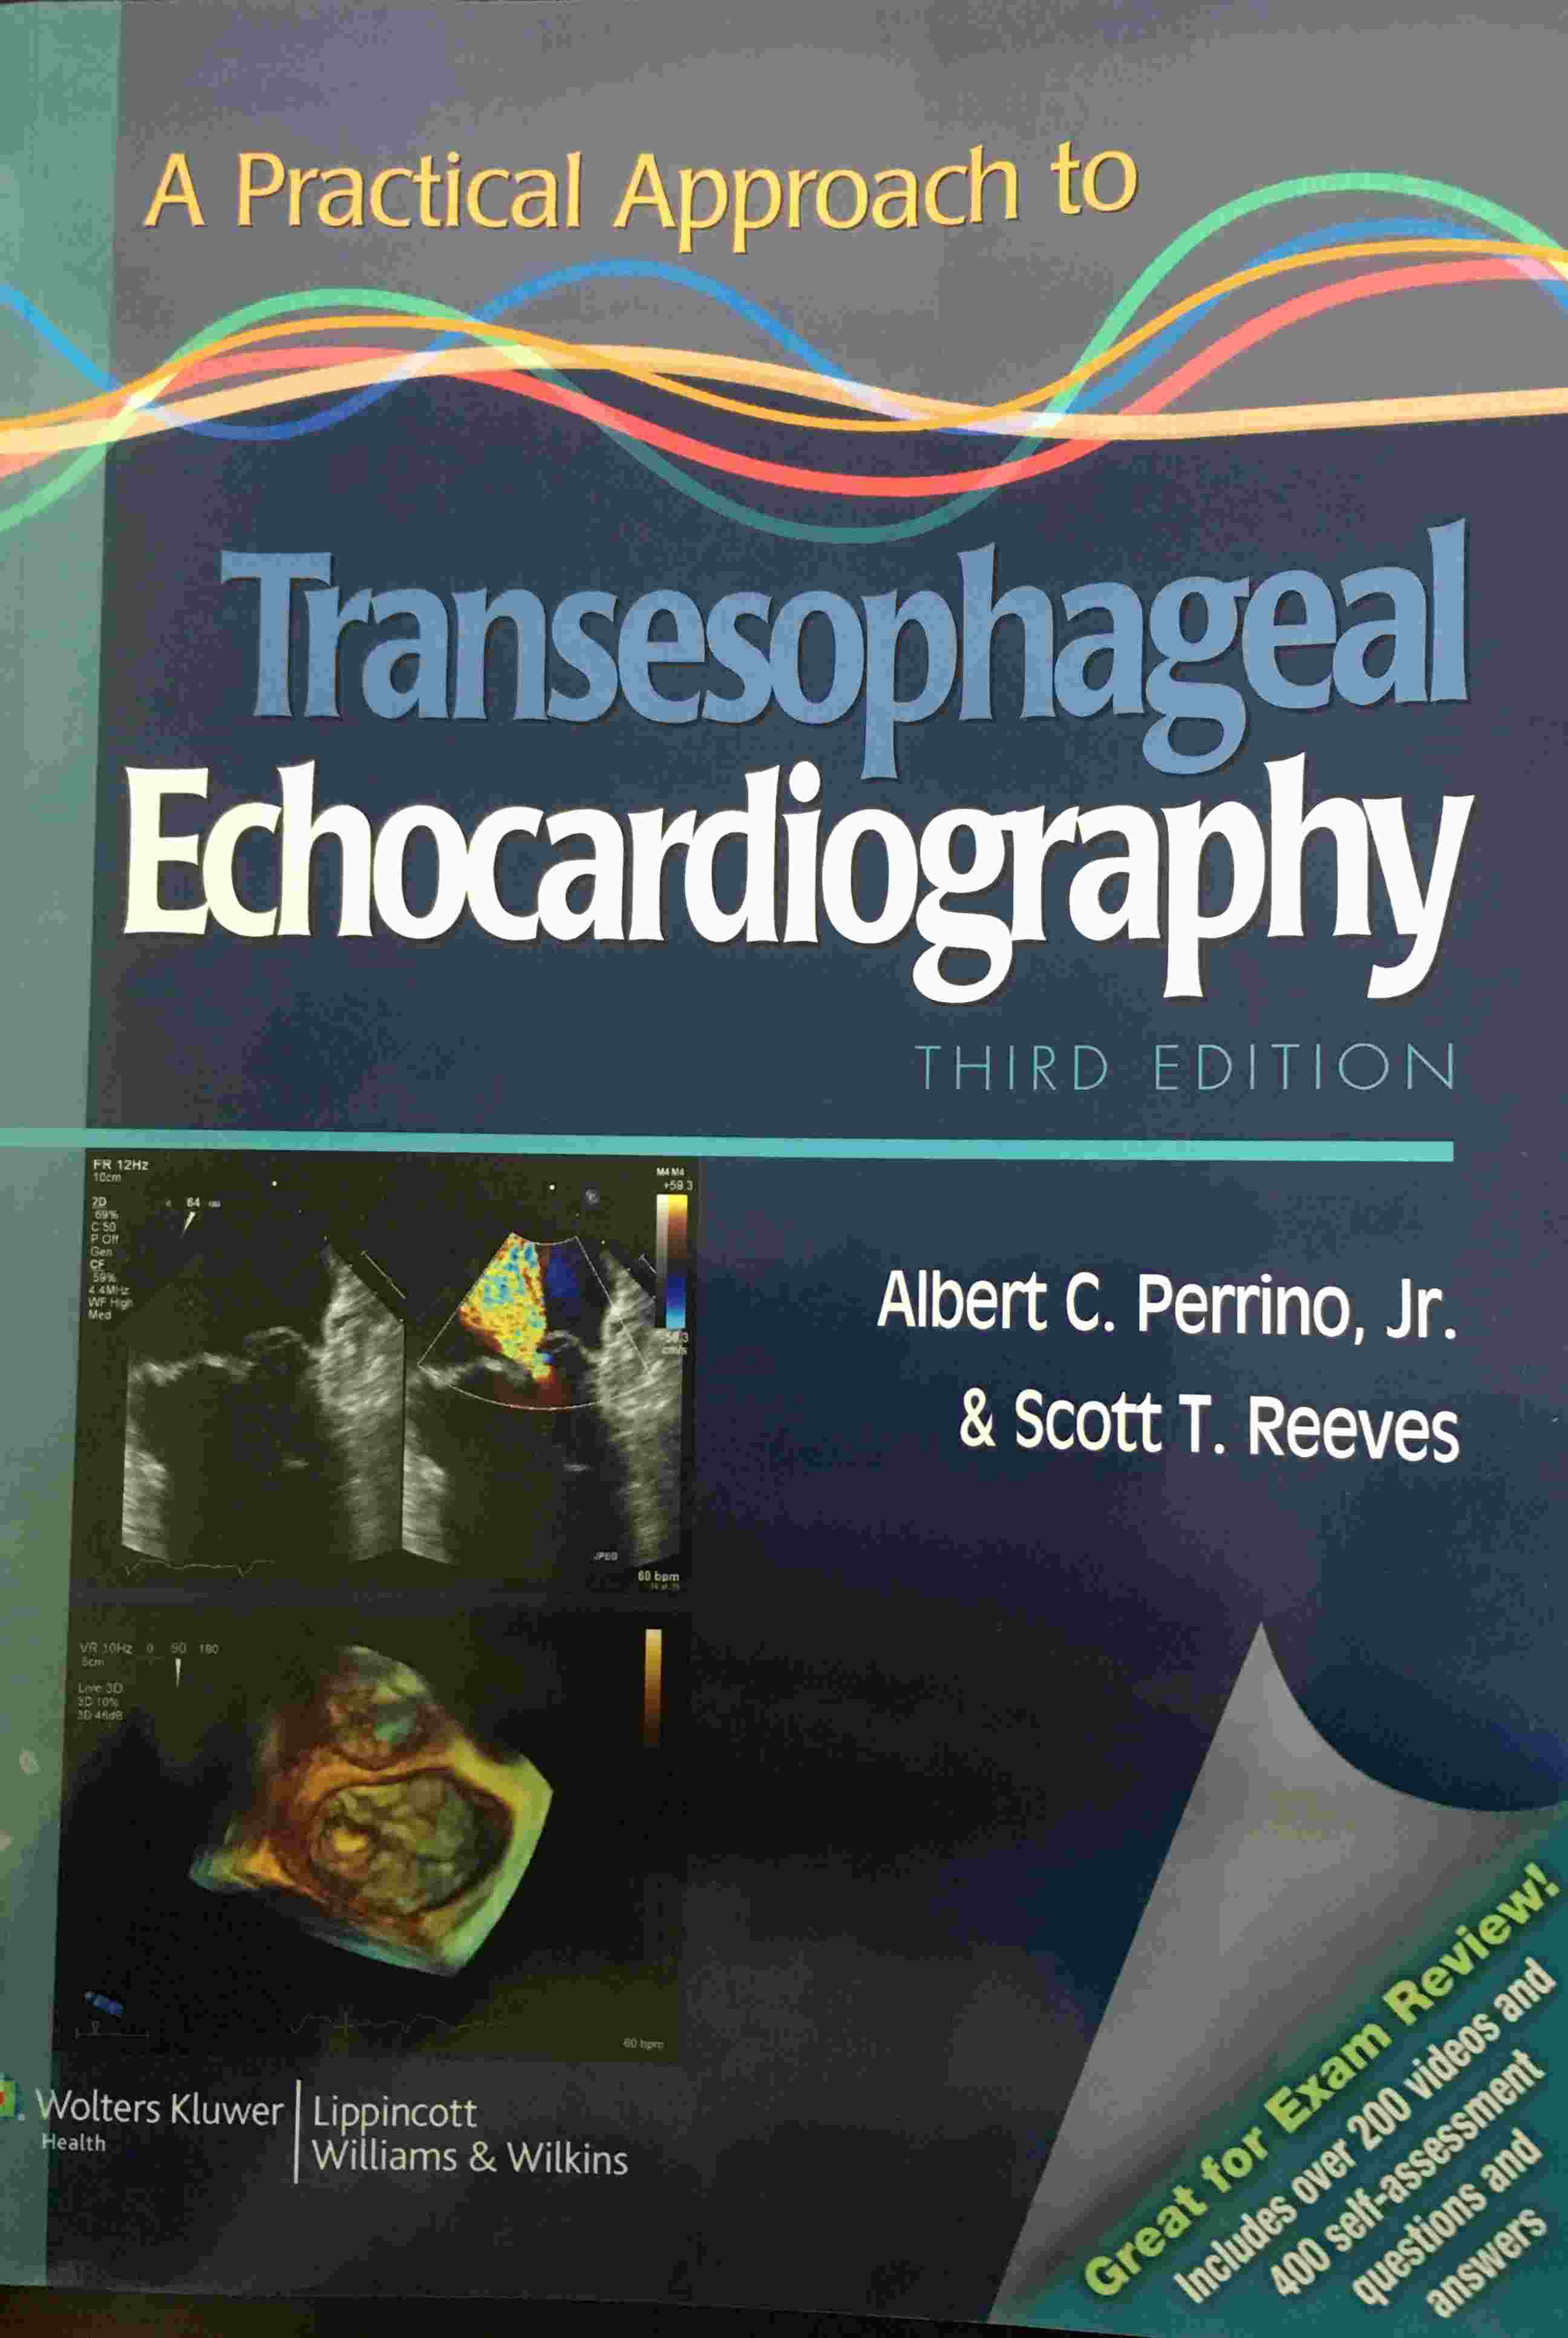 «A Practical Approach to Transesophageal Echocardiography»